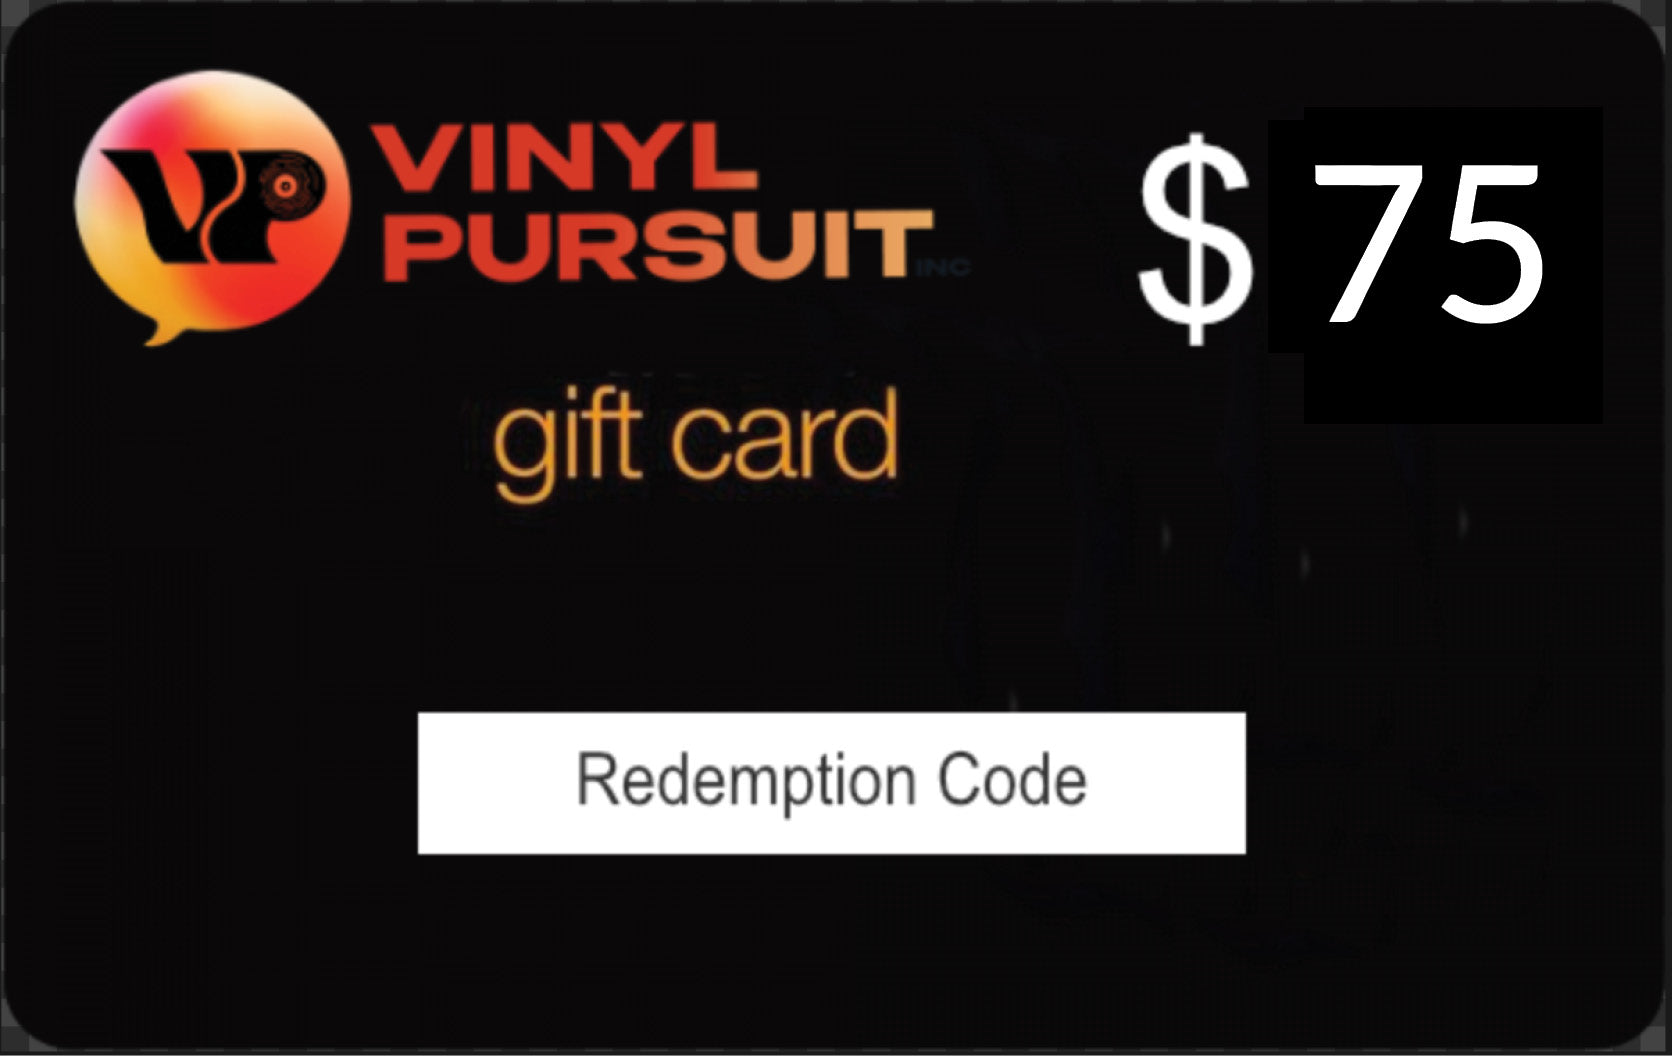 Vinyl Pursuit Gift Card - The Perfect Gift!